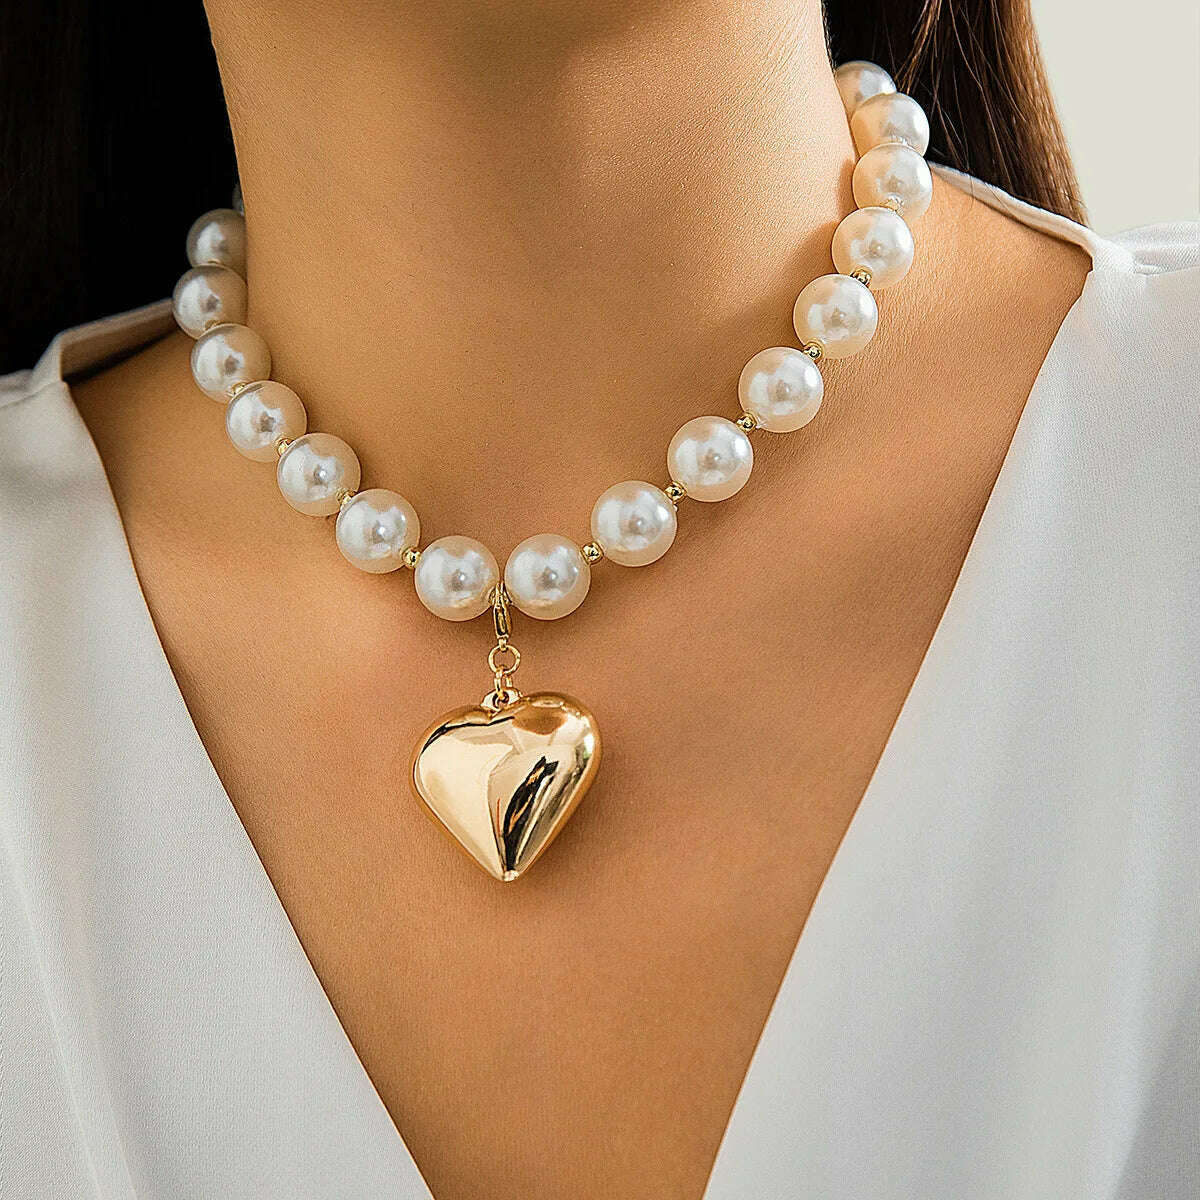 KIMLUD, DIEZI Exaggerated CCB Heart Pendant Necklace Women Party Vintage Punk Fashion Pearl Beads Choker Statement Collar Neck Jewelry, gold 6215, KIMLUD Womens Clothes